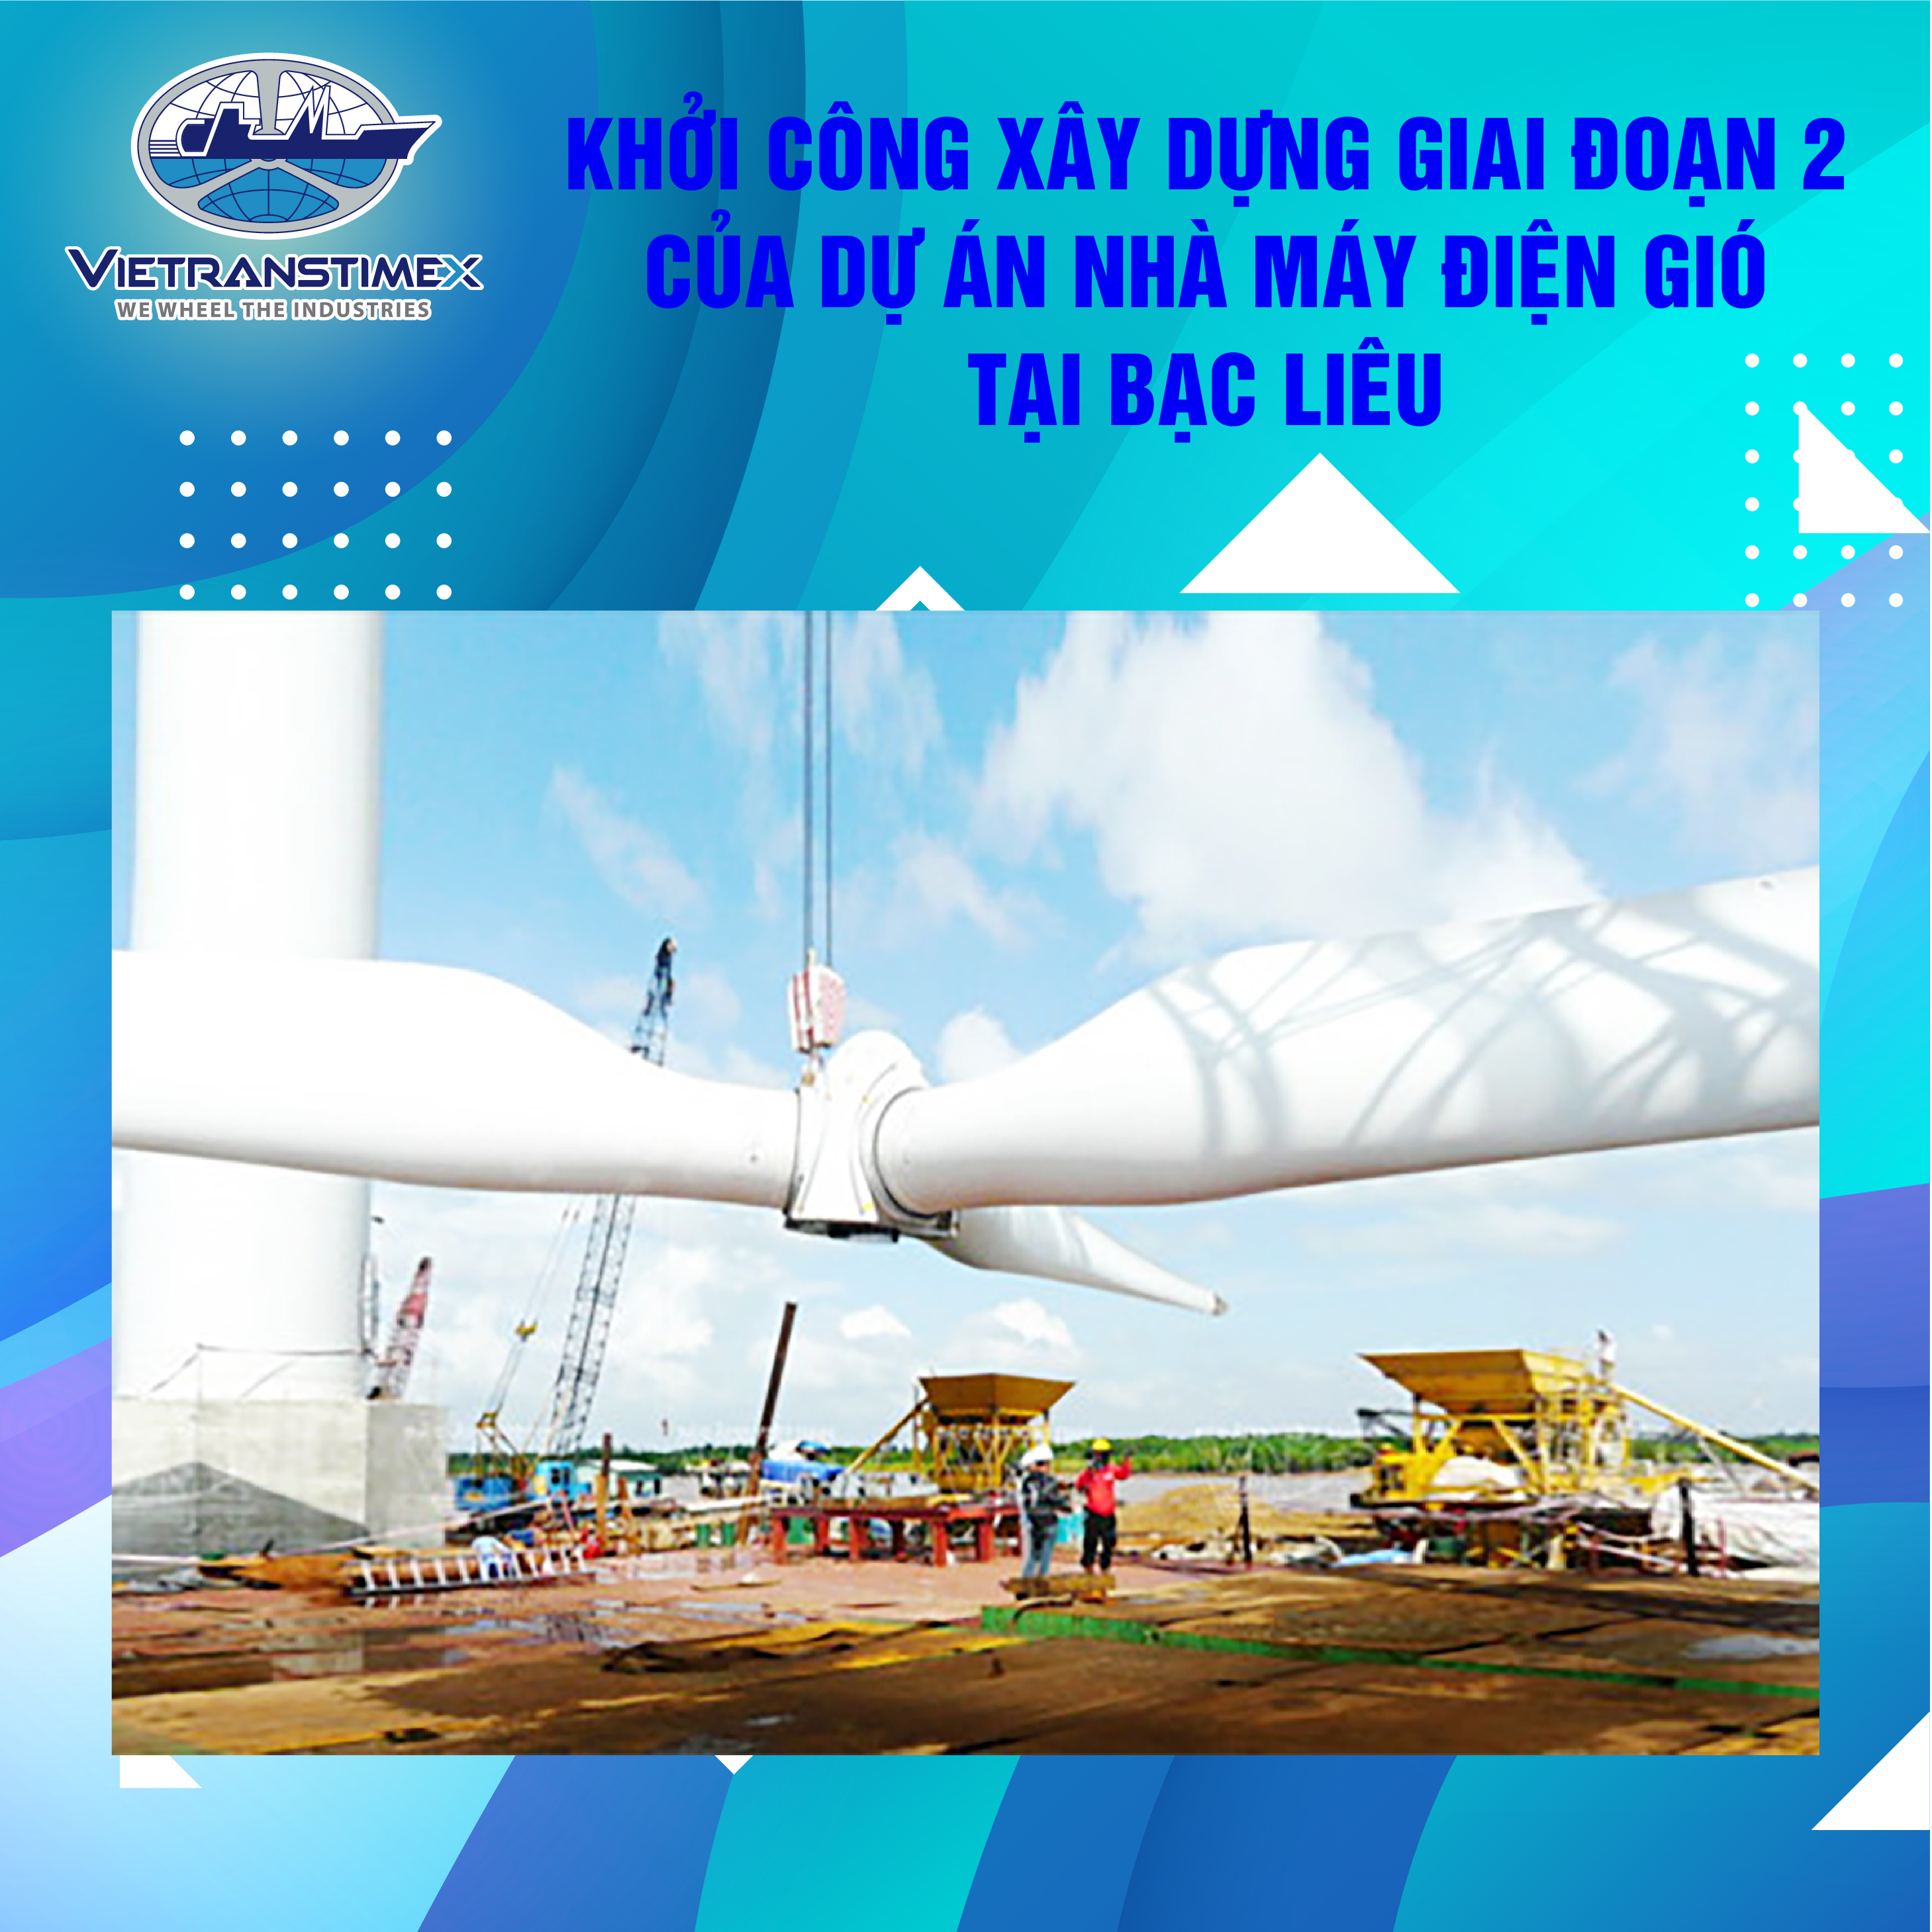 Construction Of Wind Power Plant’s Second Phase Begins In Bac Lieu